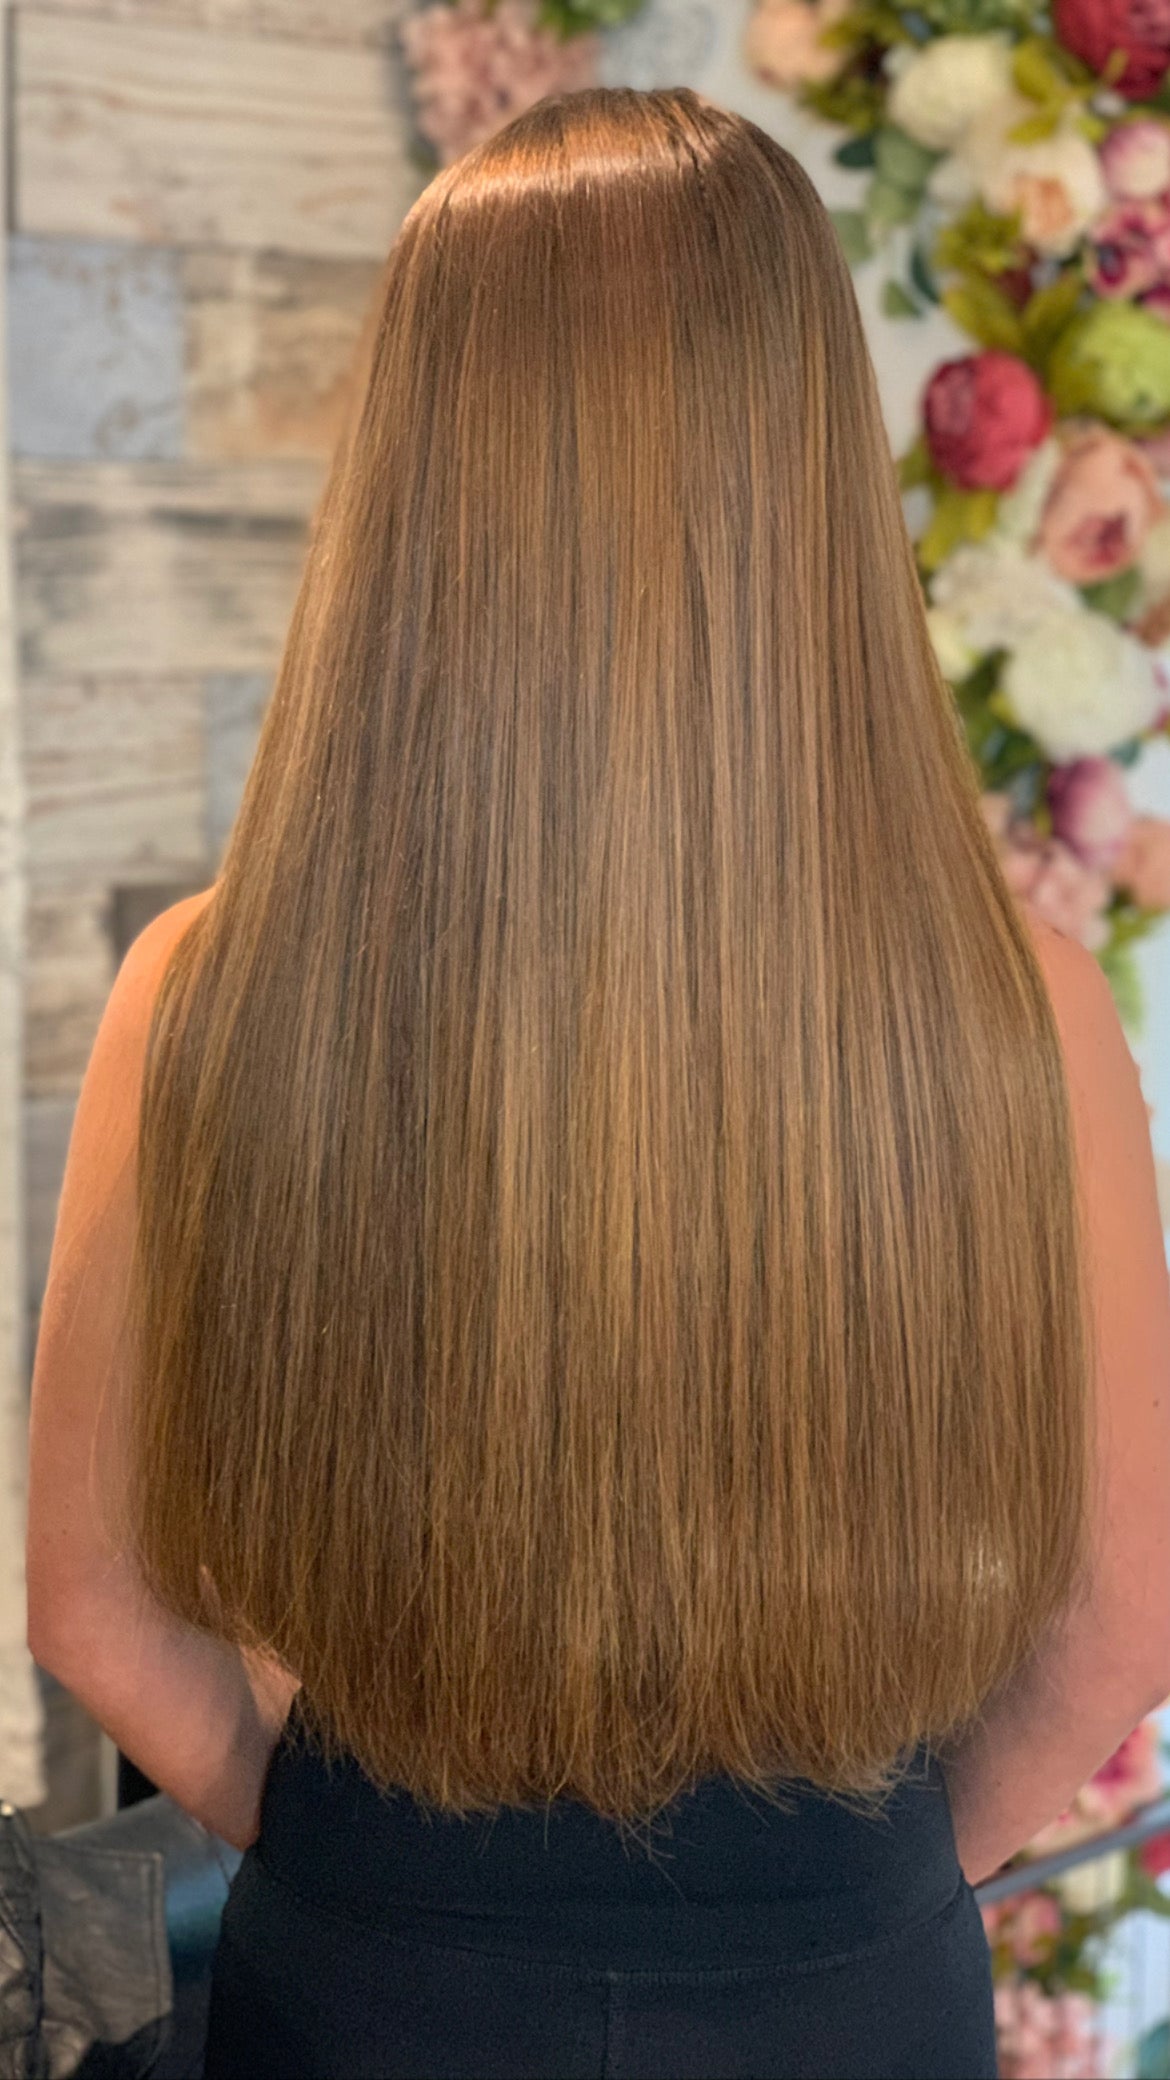 Great Lengths hair exetnsion